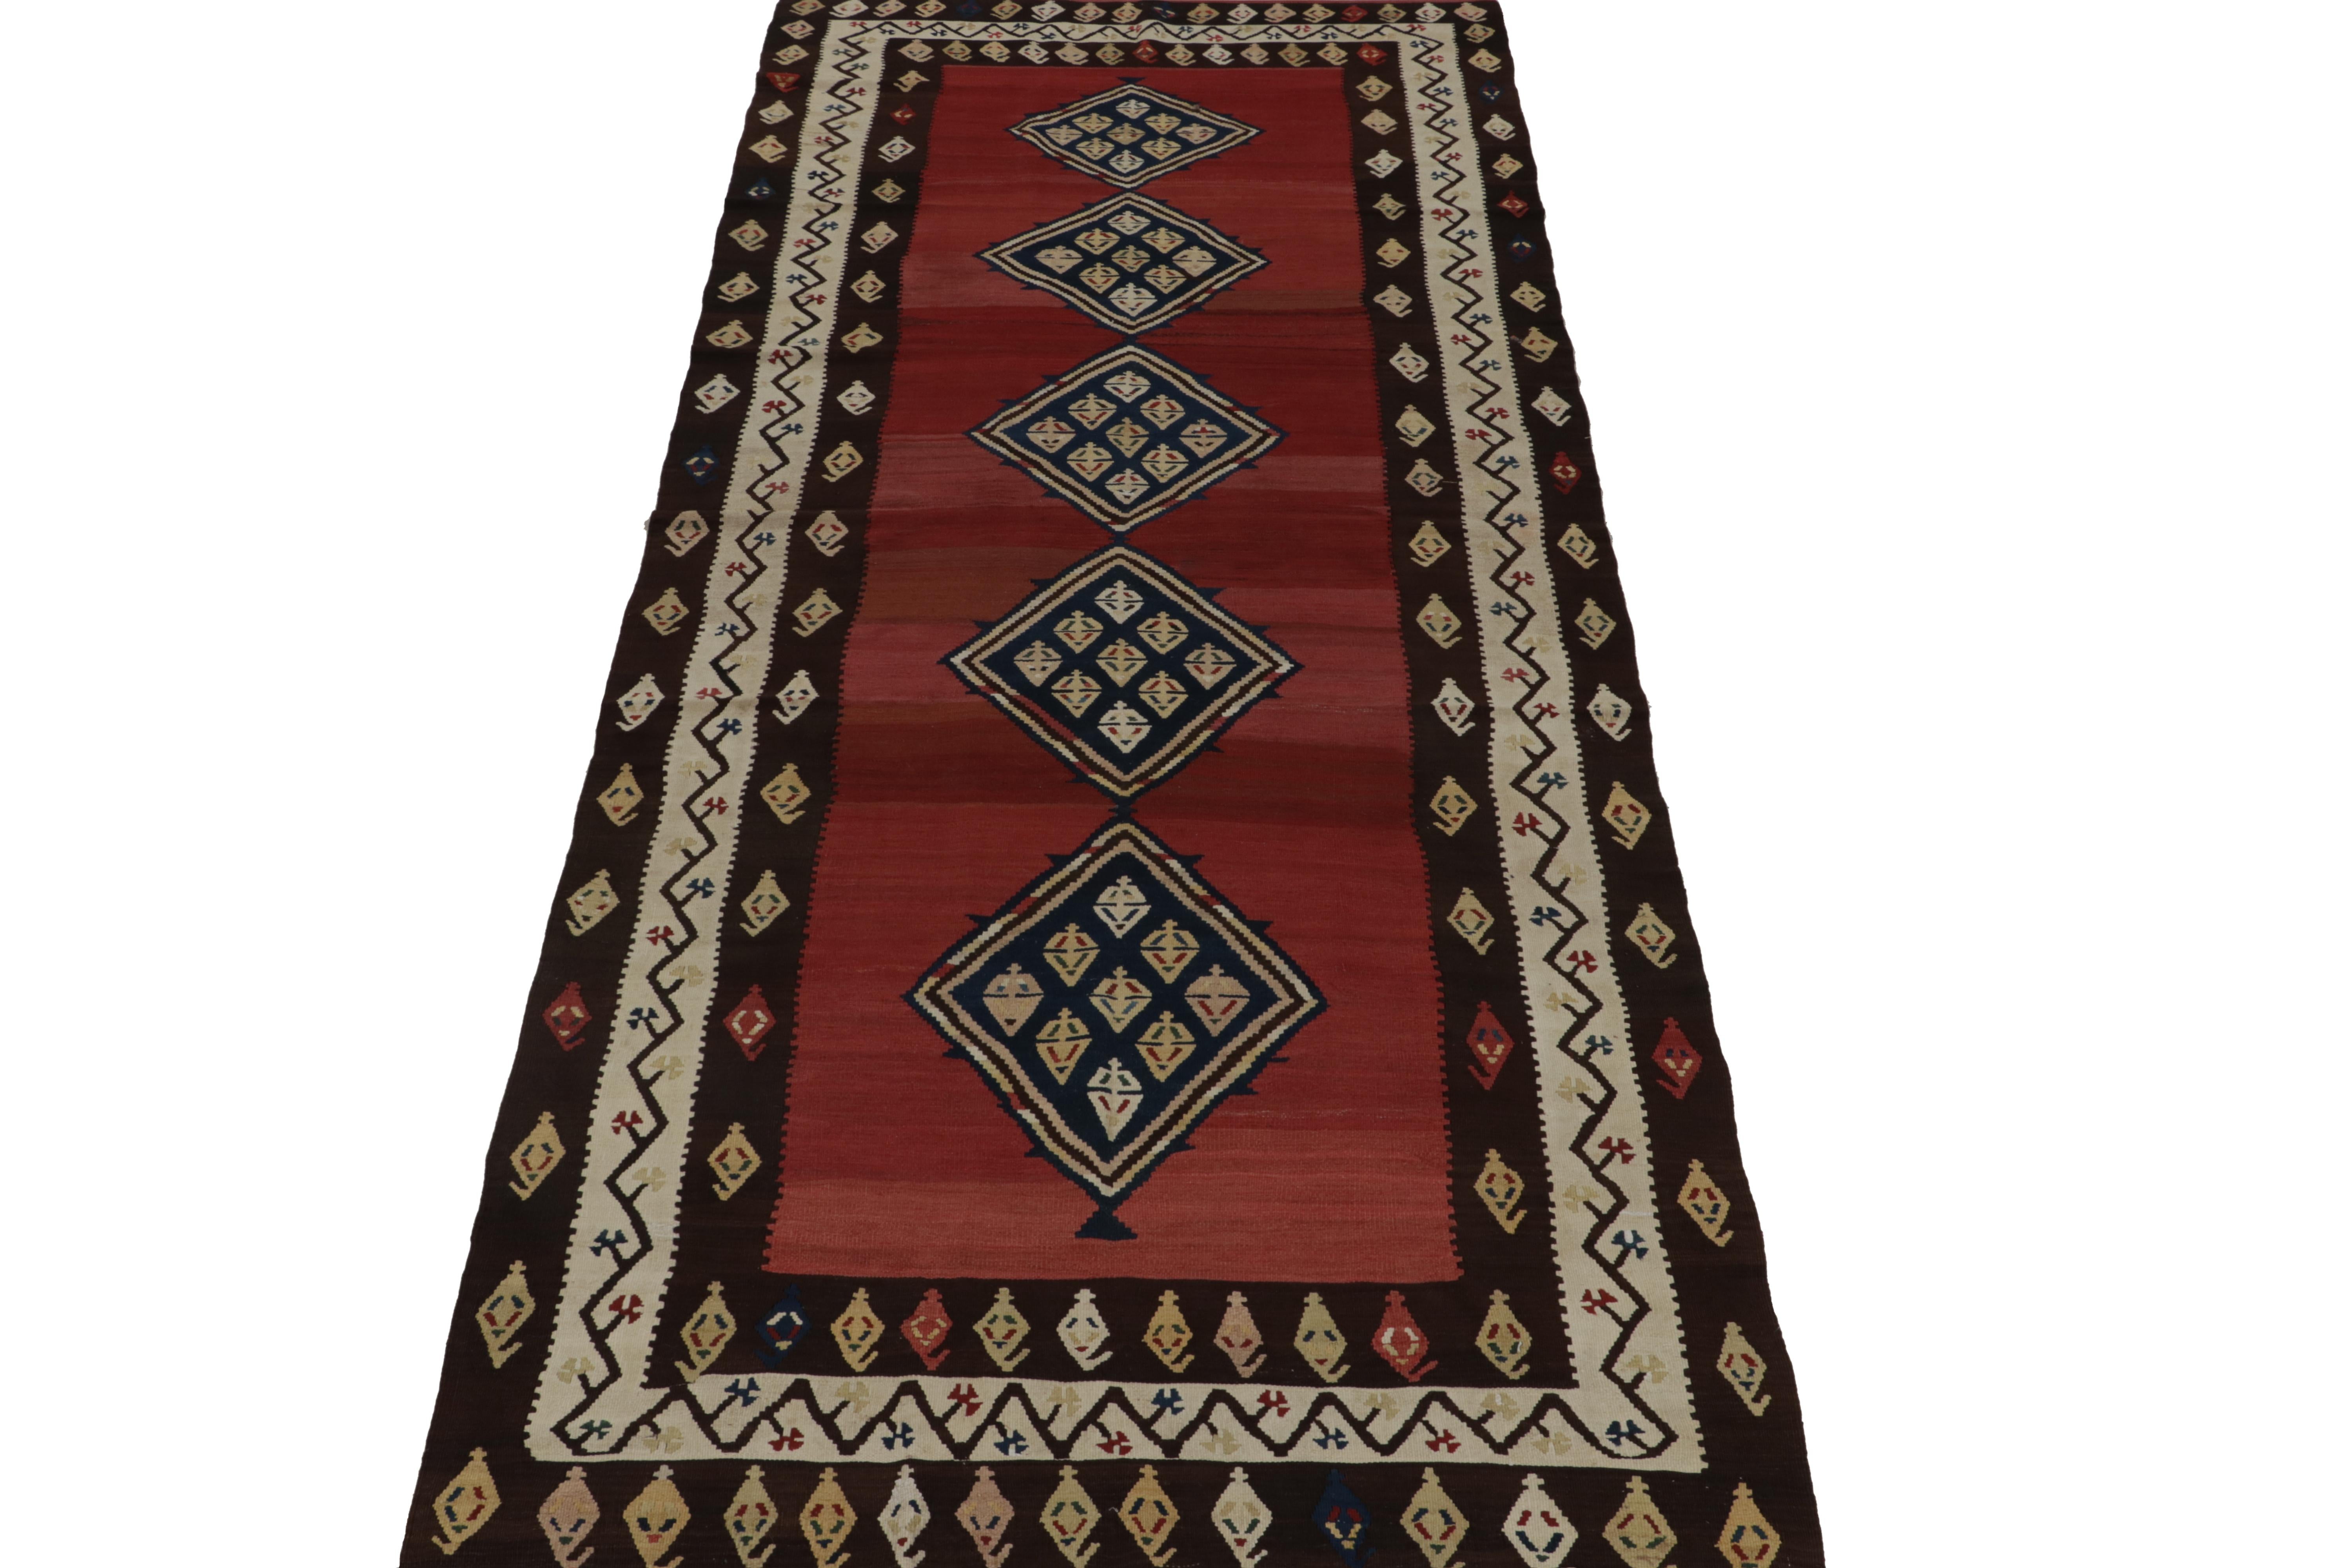 This vintage 6x13 Shahsavan kilim is a distinct gallery rug in Rug & Kilim’s Persian tribal curations. Handwoven in wool, it’s believed to originate circa 1950-1960. 

Further on the Design:

The design prefers blue medallions on a red open